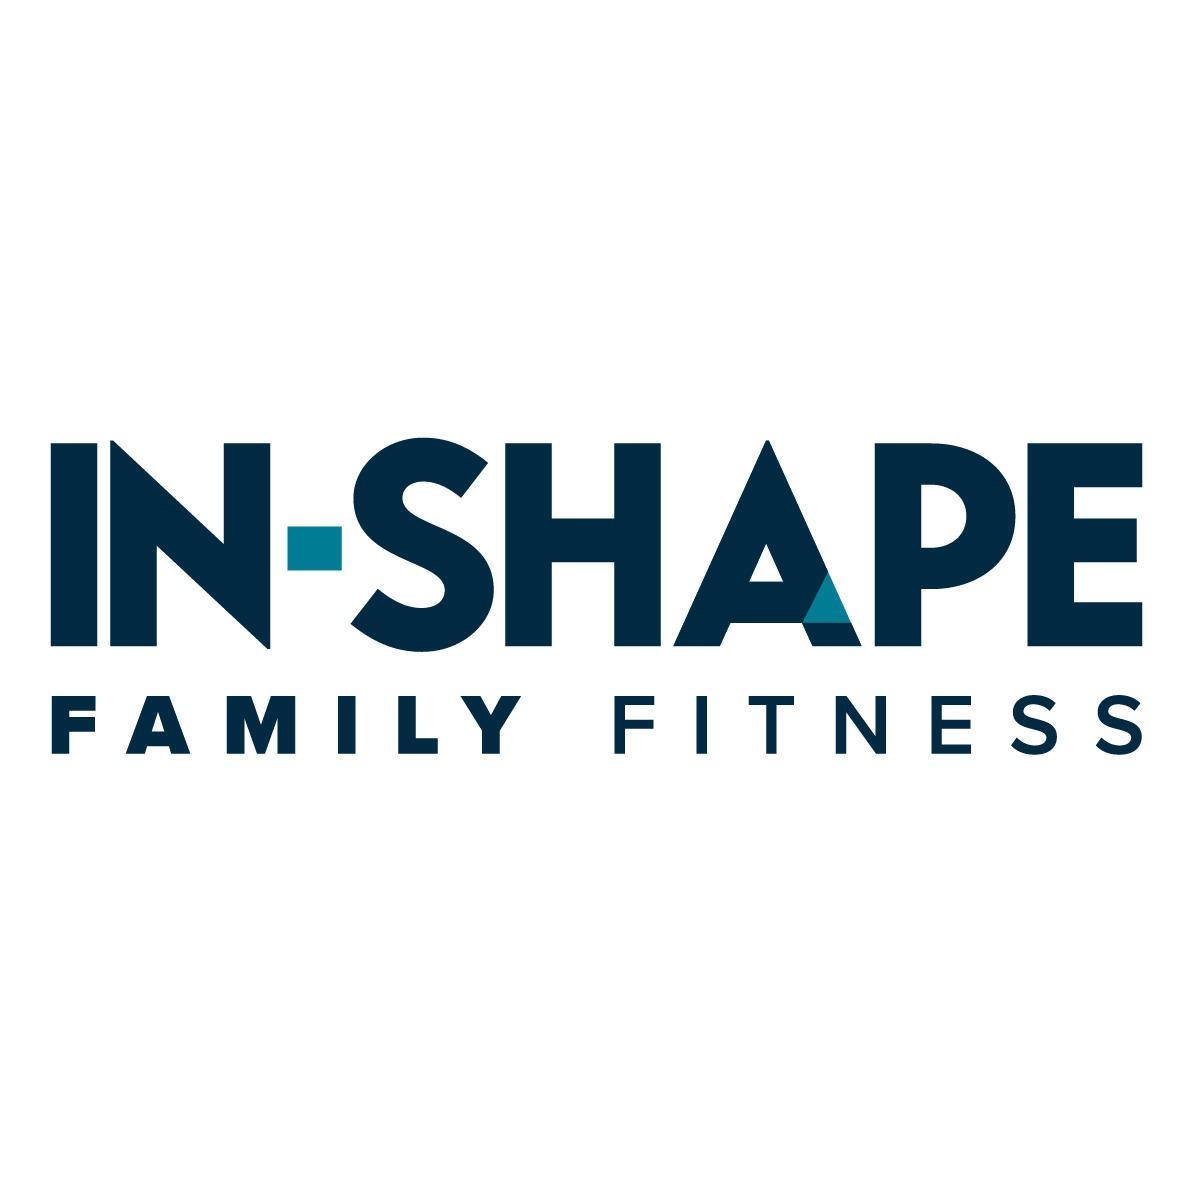 In-Shape Family Fitness - Shingle Springs, CA 95682 - (530)460-6437 | ShowMeLocal.com